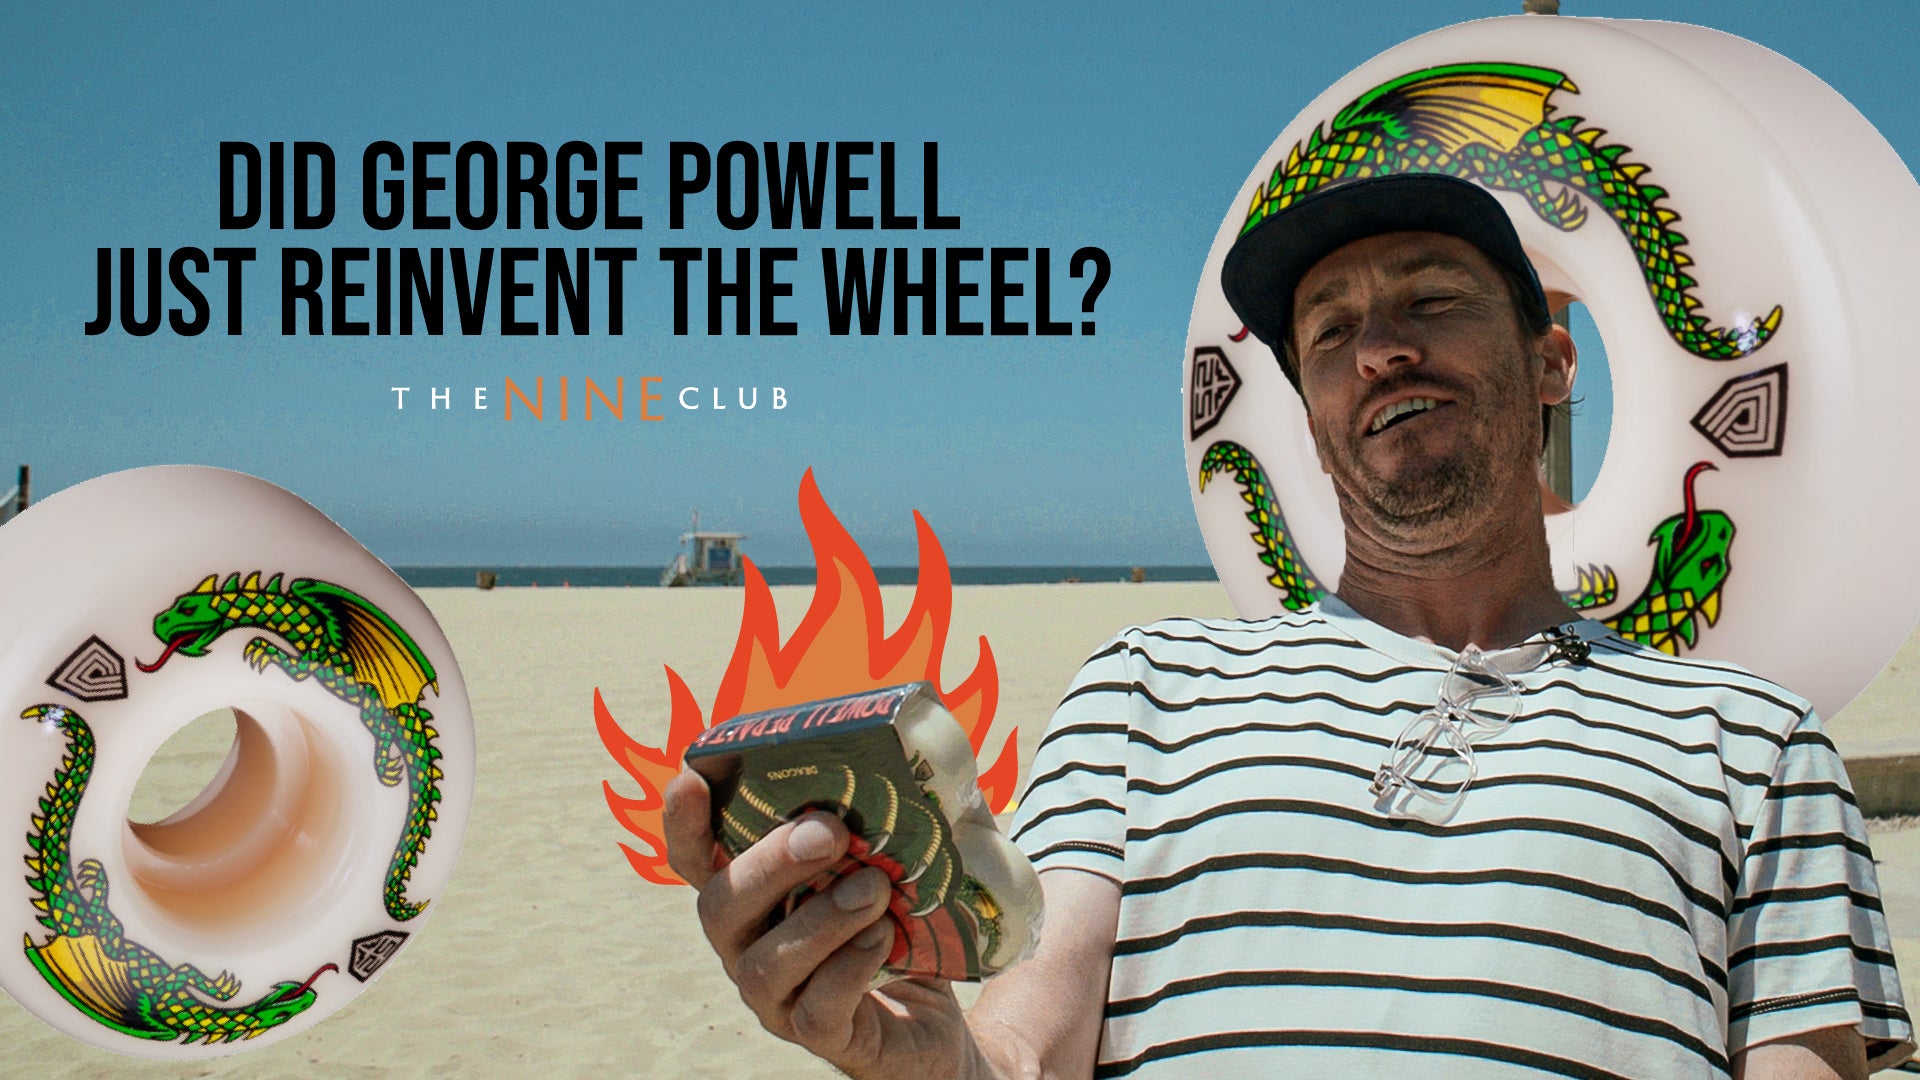 Did George Powell Just Reinvent The Wheel? - Testimonial Video